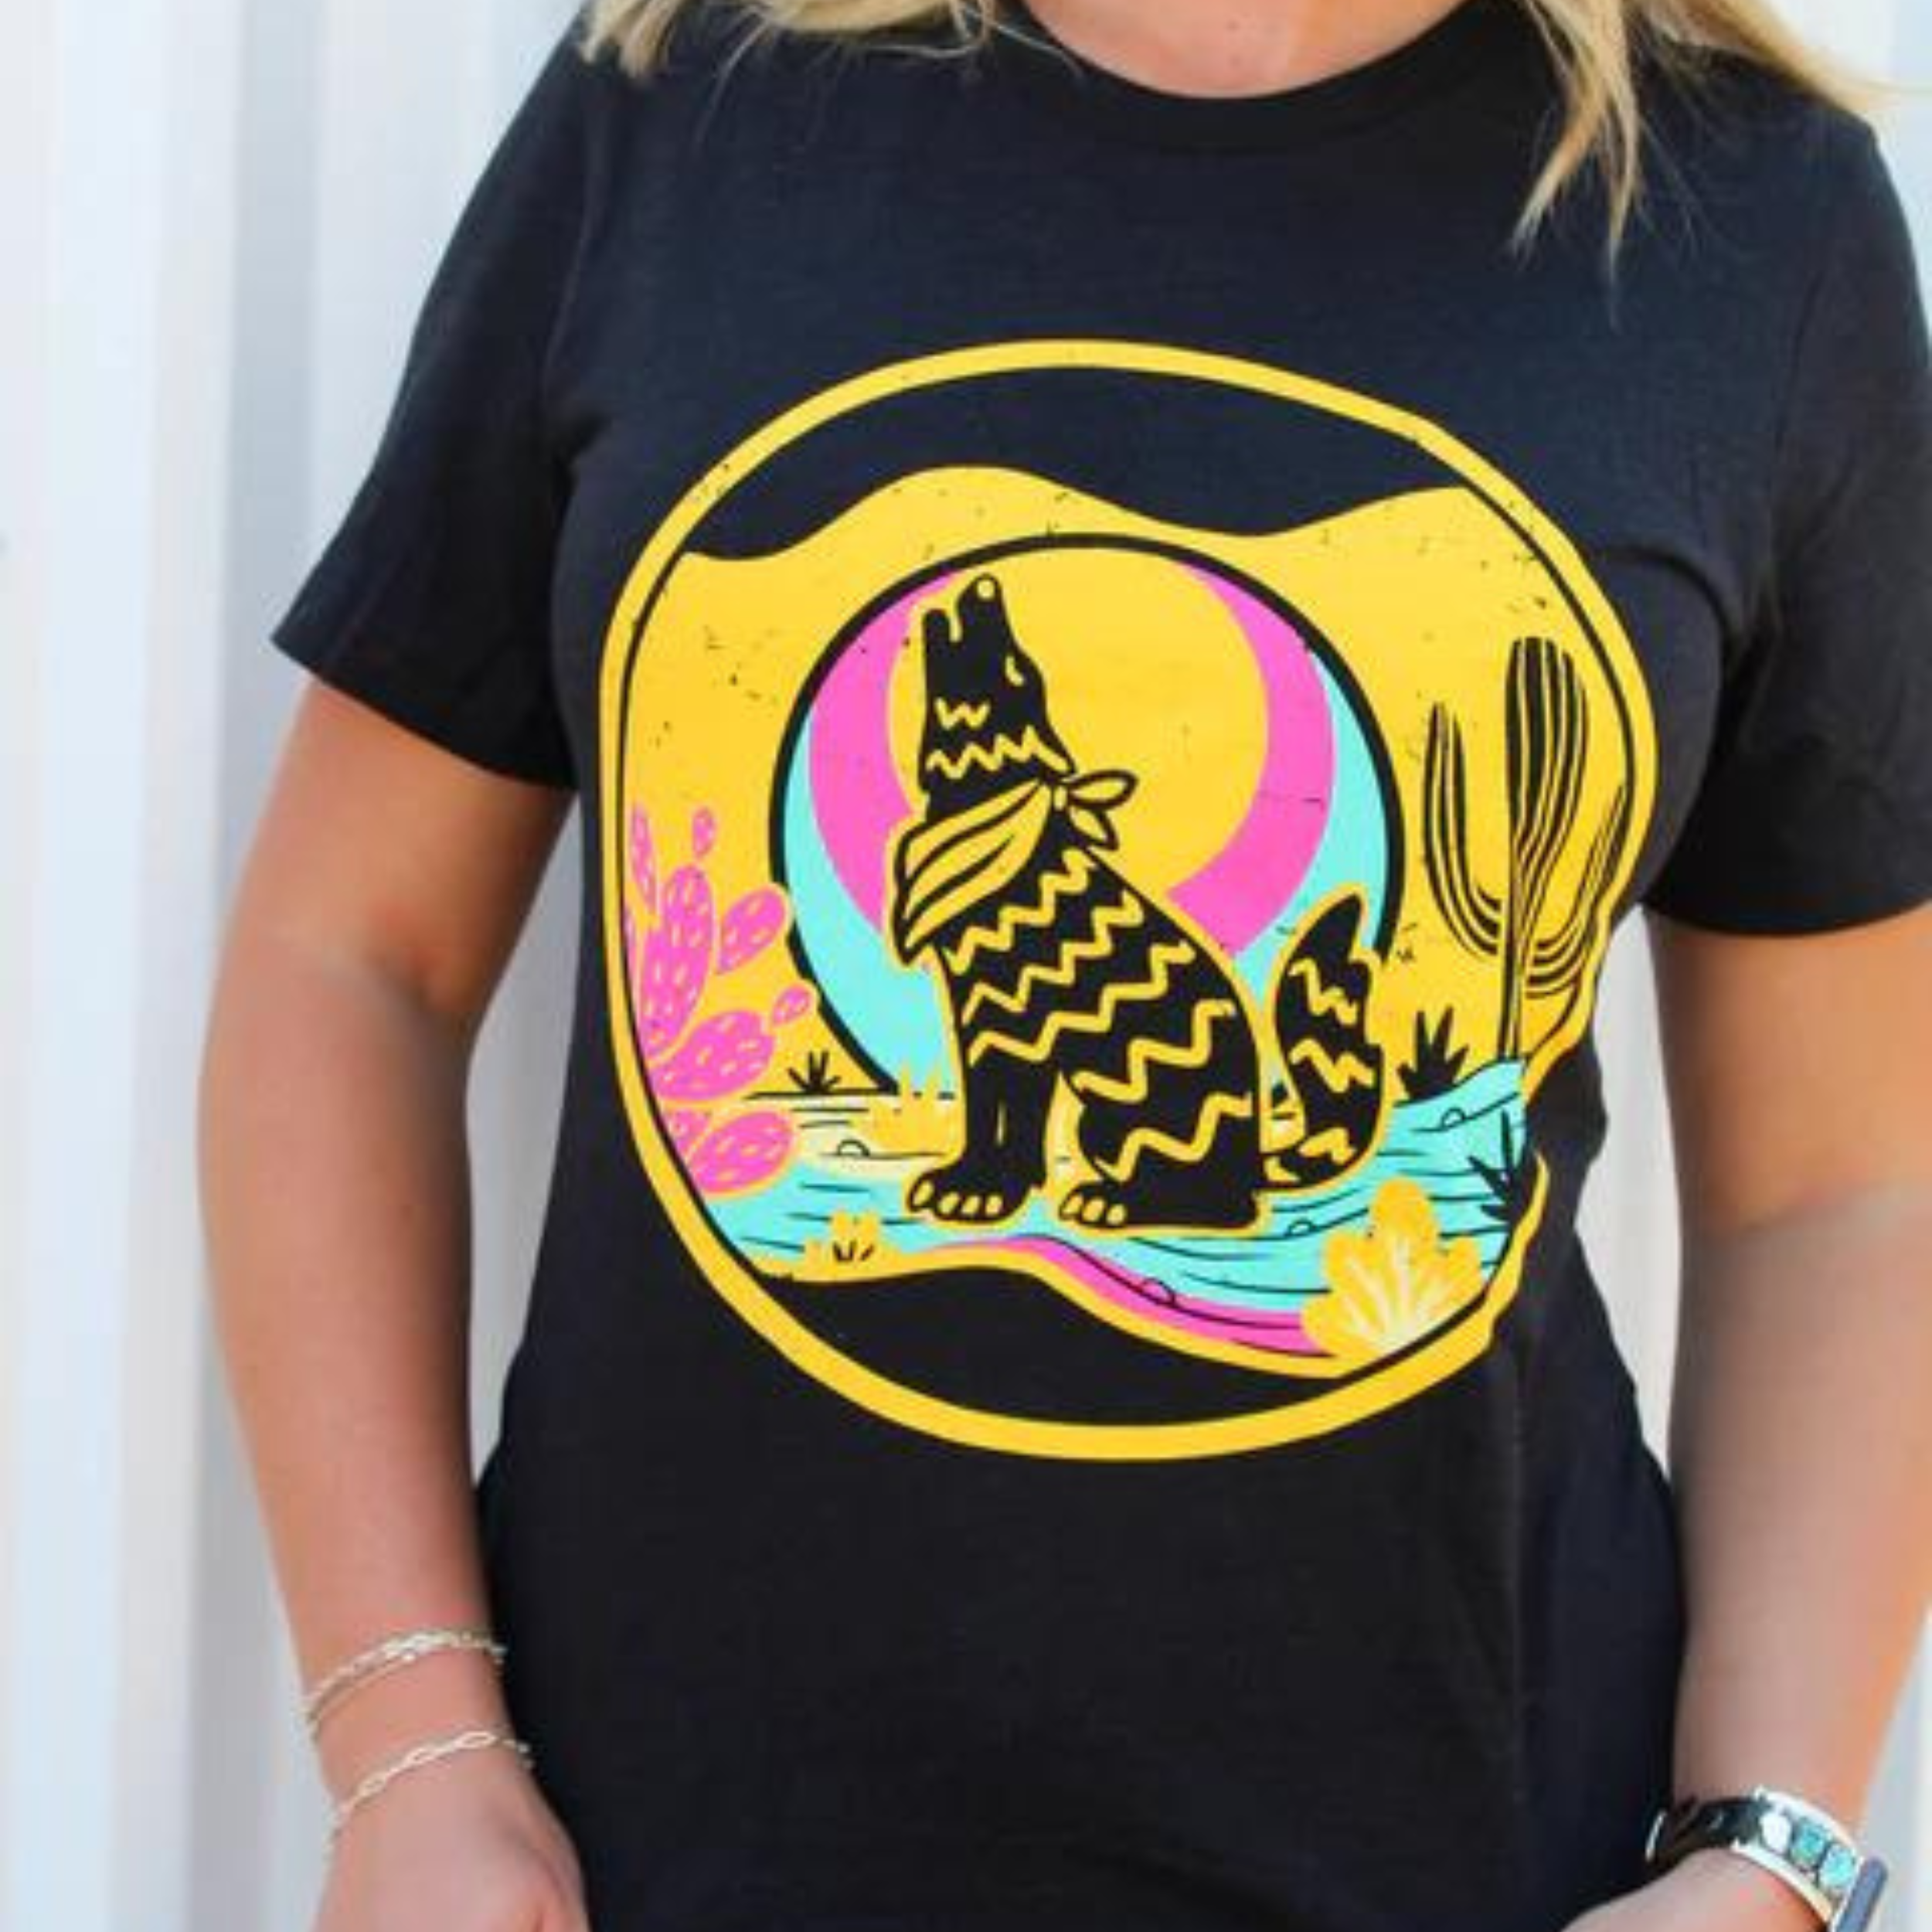 Online Exclusive | Ghost Ranch Tee in Black - Giddy Up Glamour Boutique